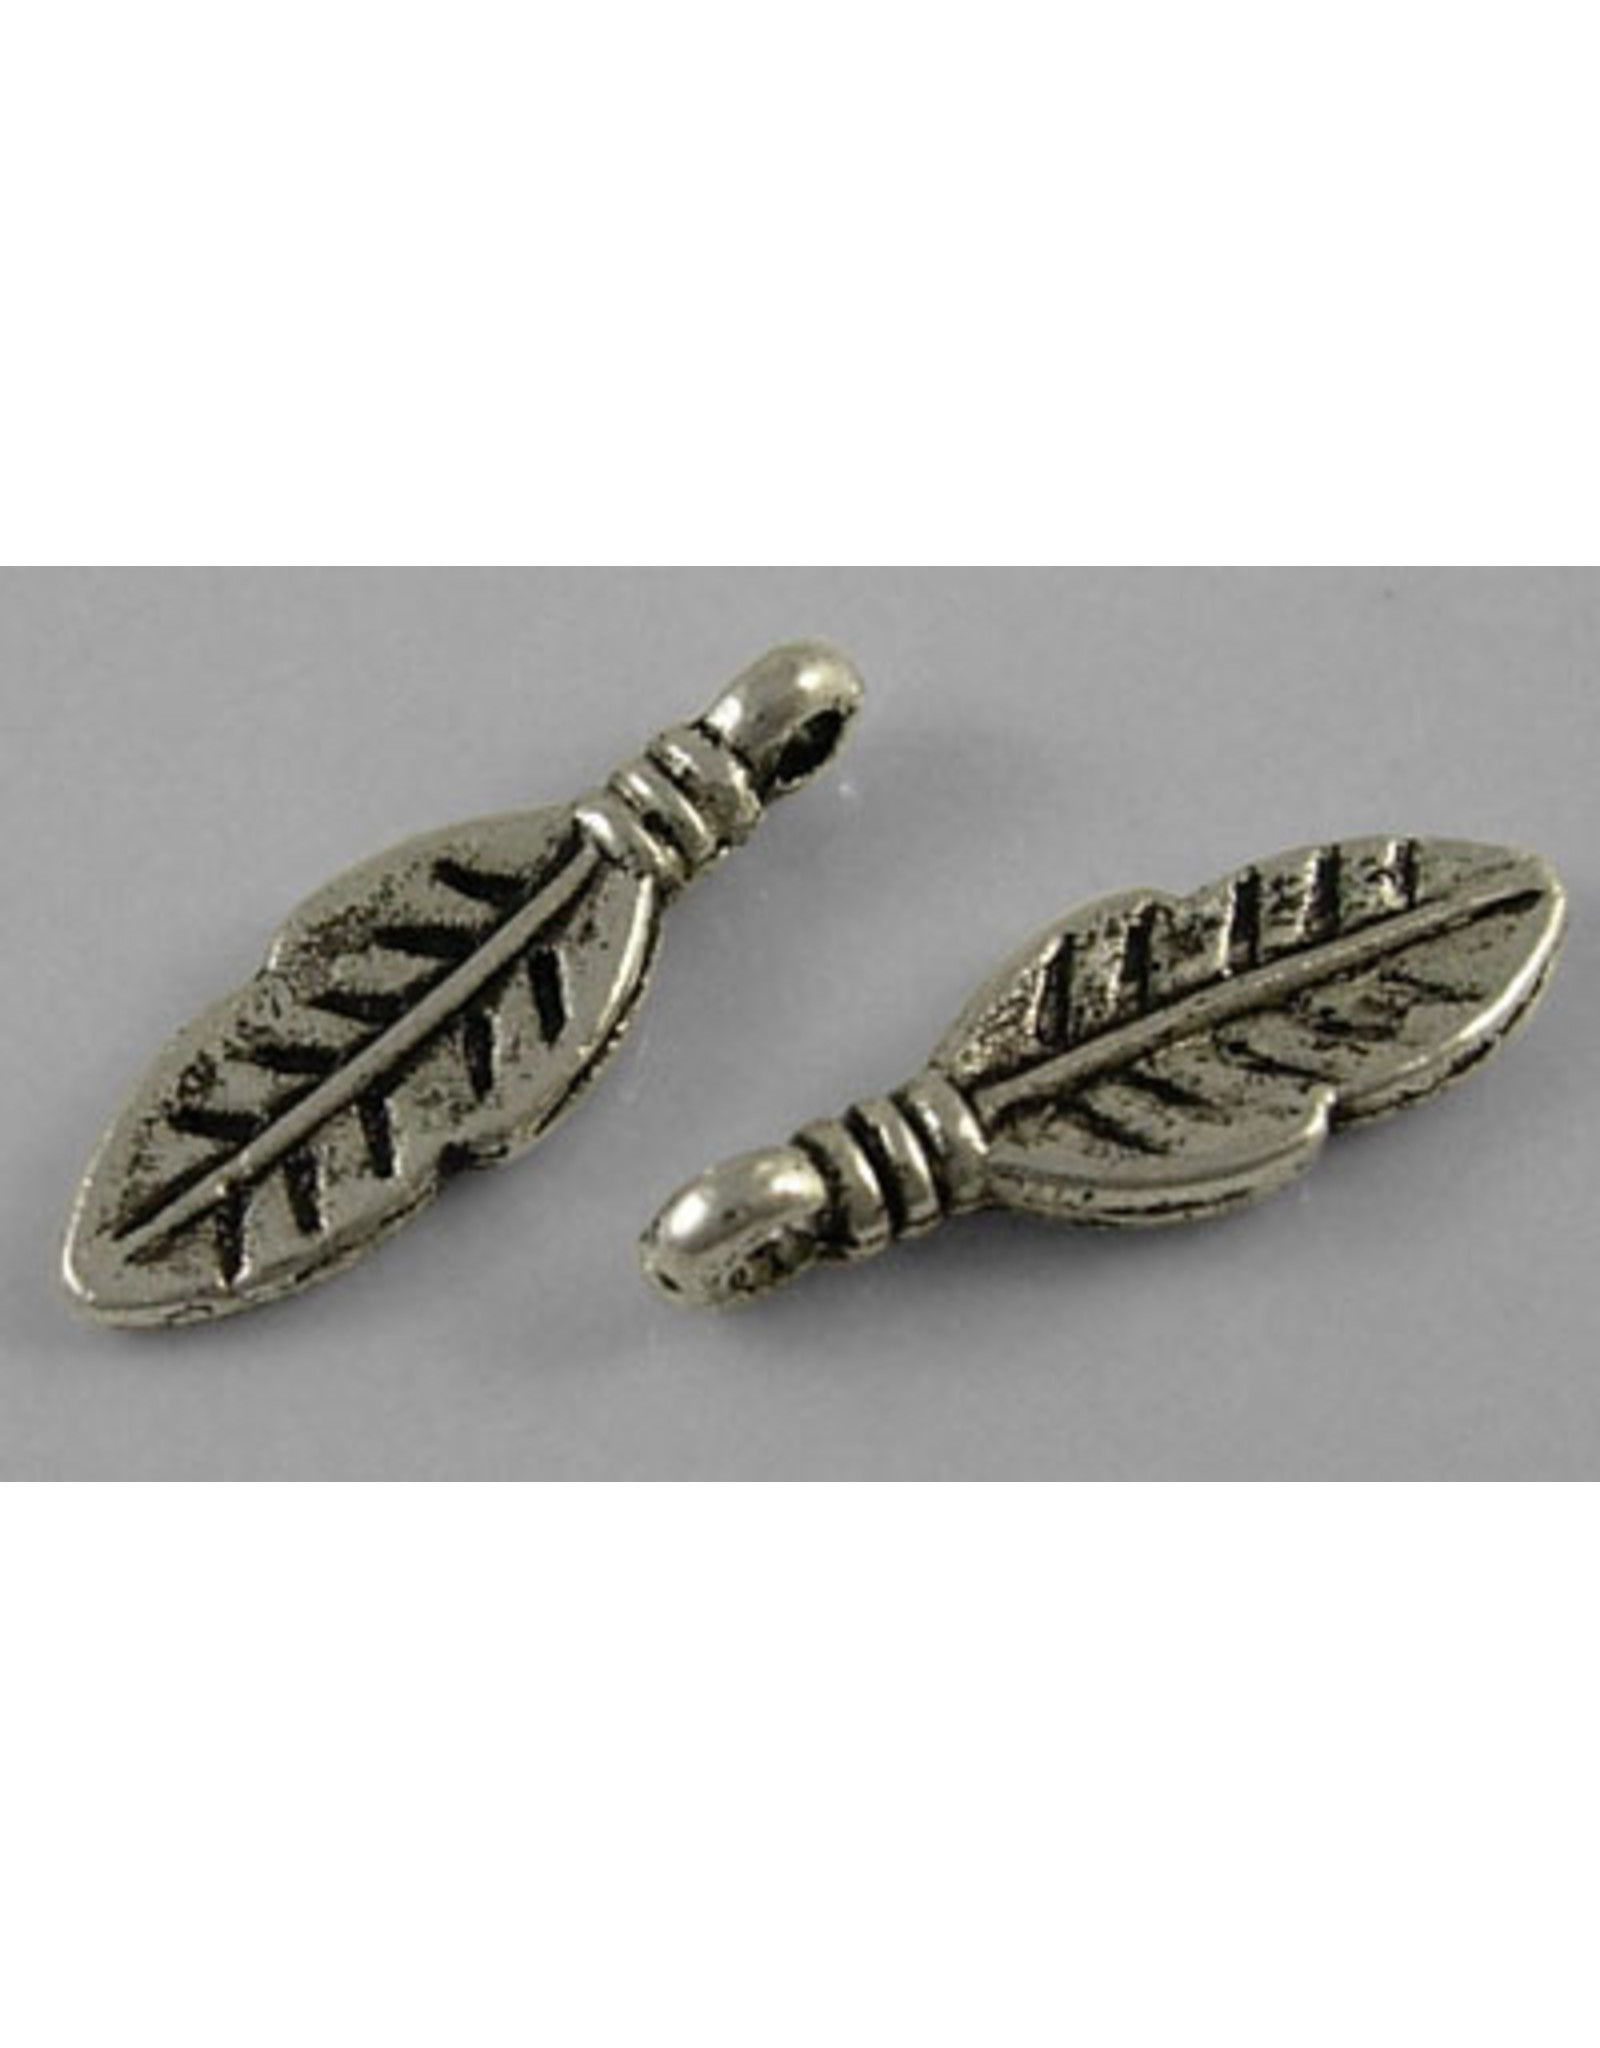 Feather Antique Silver 17x6mm   x20 NF